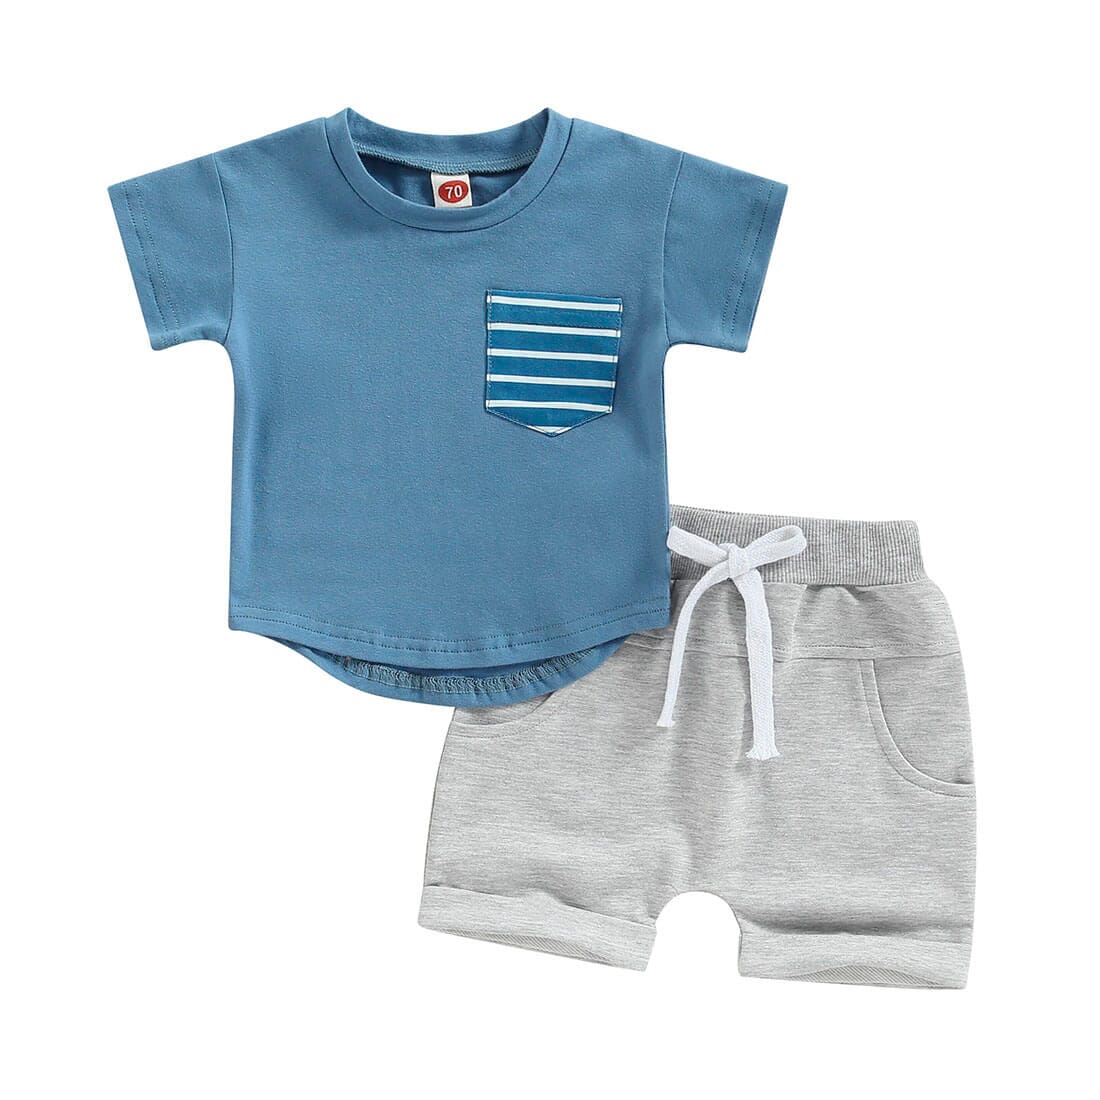 Striped Pocket Tee Solid Shorts Baby Set Blue 3-6 M 